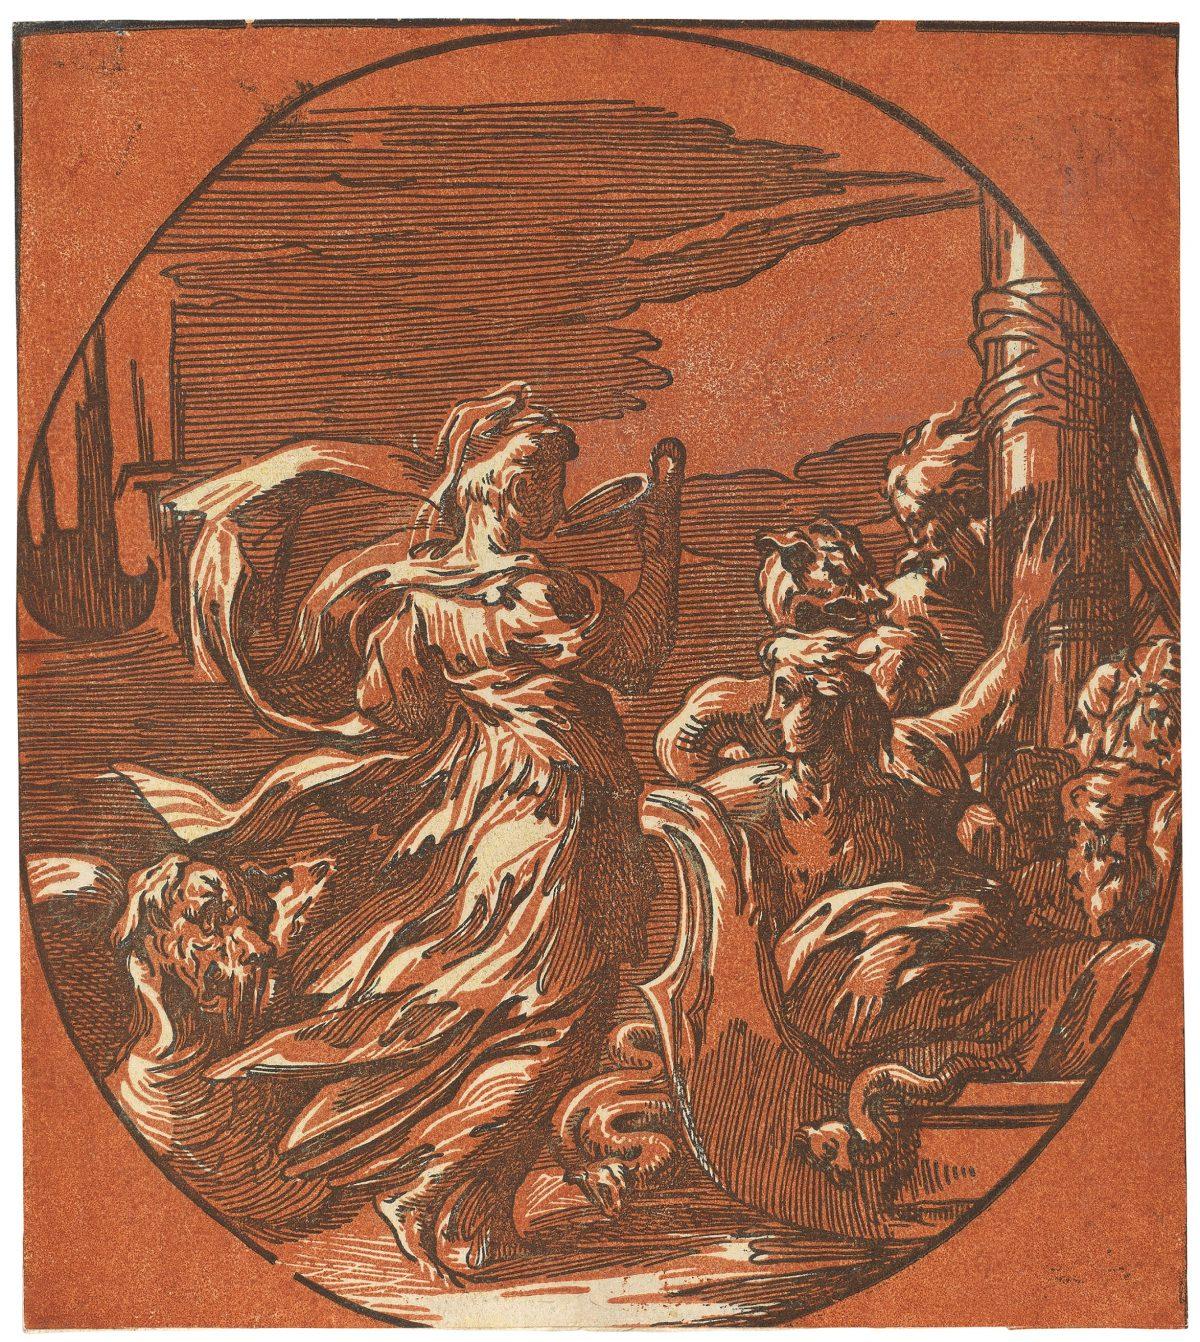 "Circe Drinking (Circella)," 1540s, by Antonio da Trento or Niccolò Vicentino, after Parmigianino. Chiaroscuro woodcut from two blocks in red and black. 8 1/2 inches by 71/2 inches. Ailsa Mellon Bruce Fund. (National Gallery of Art, Washington)